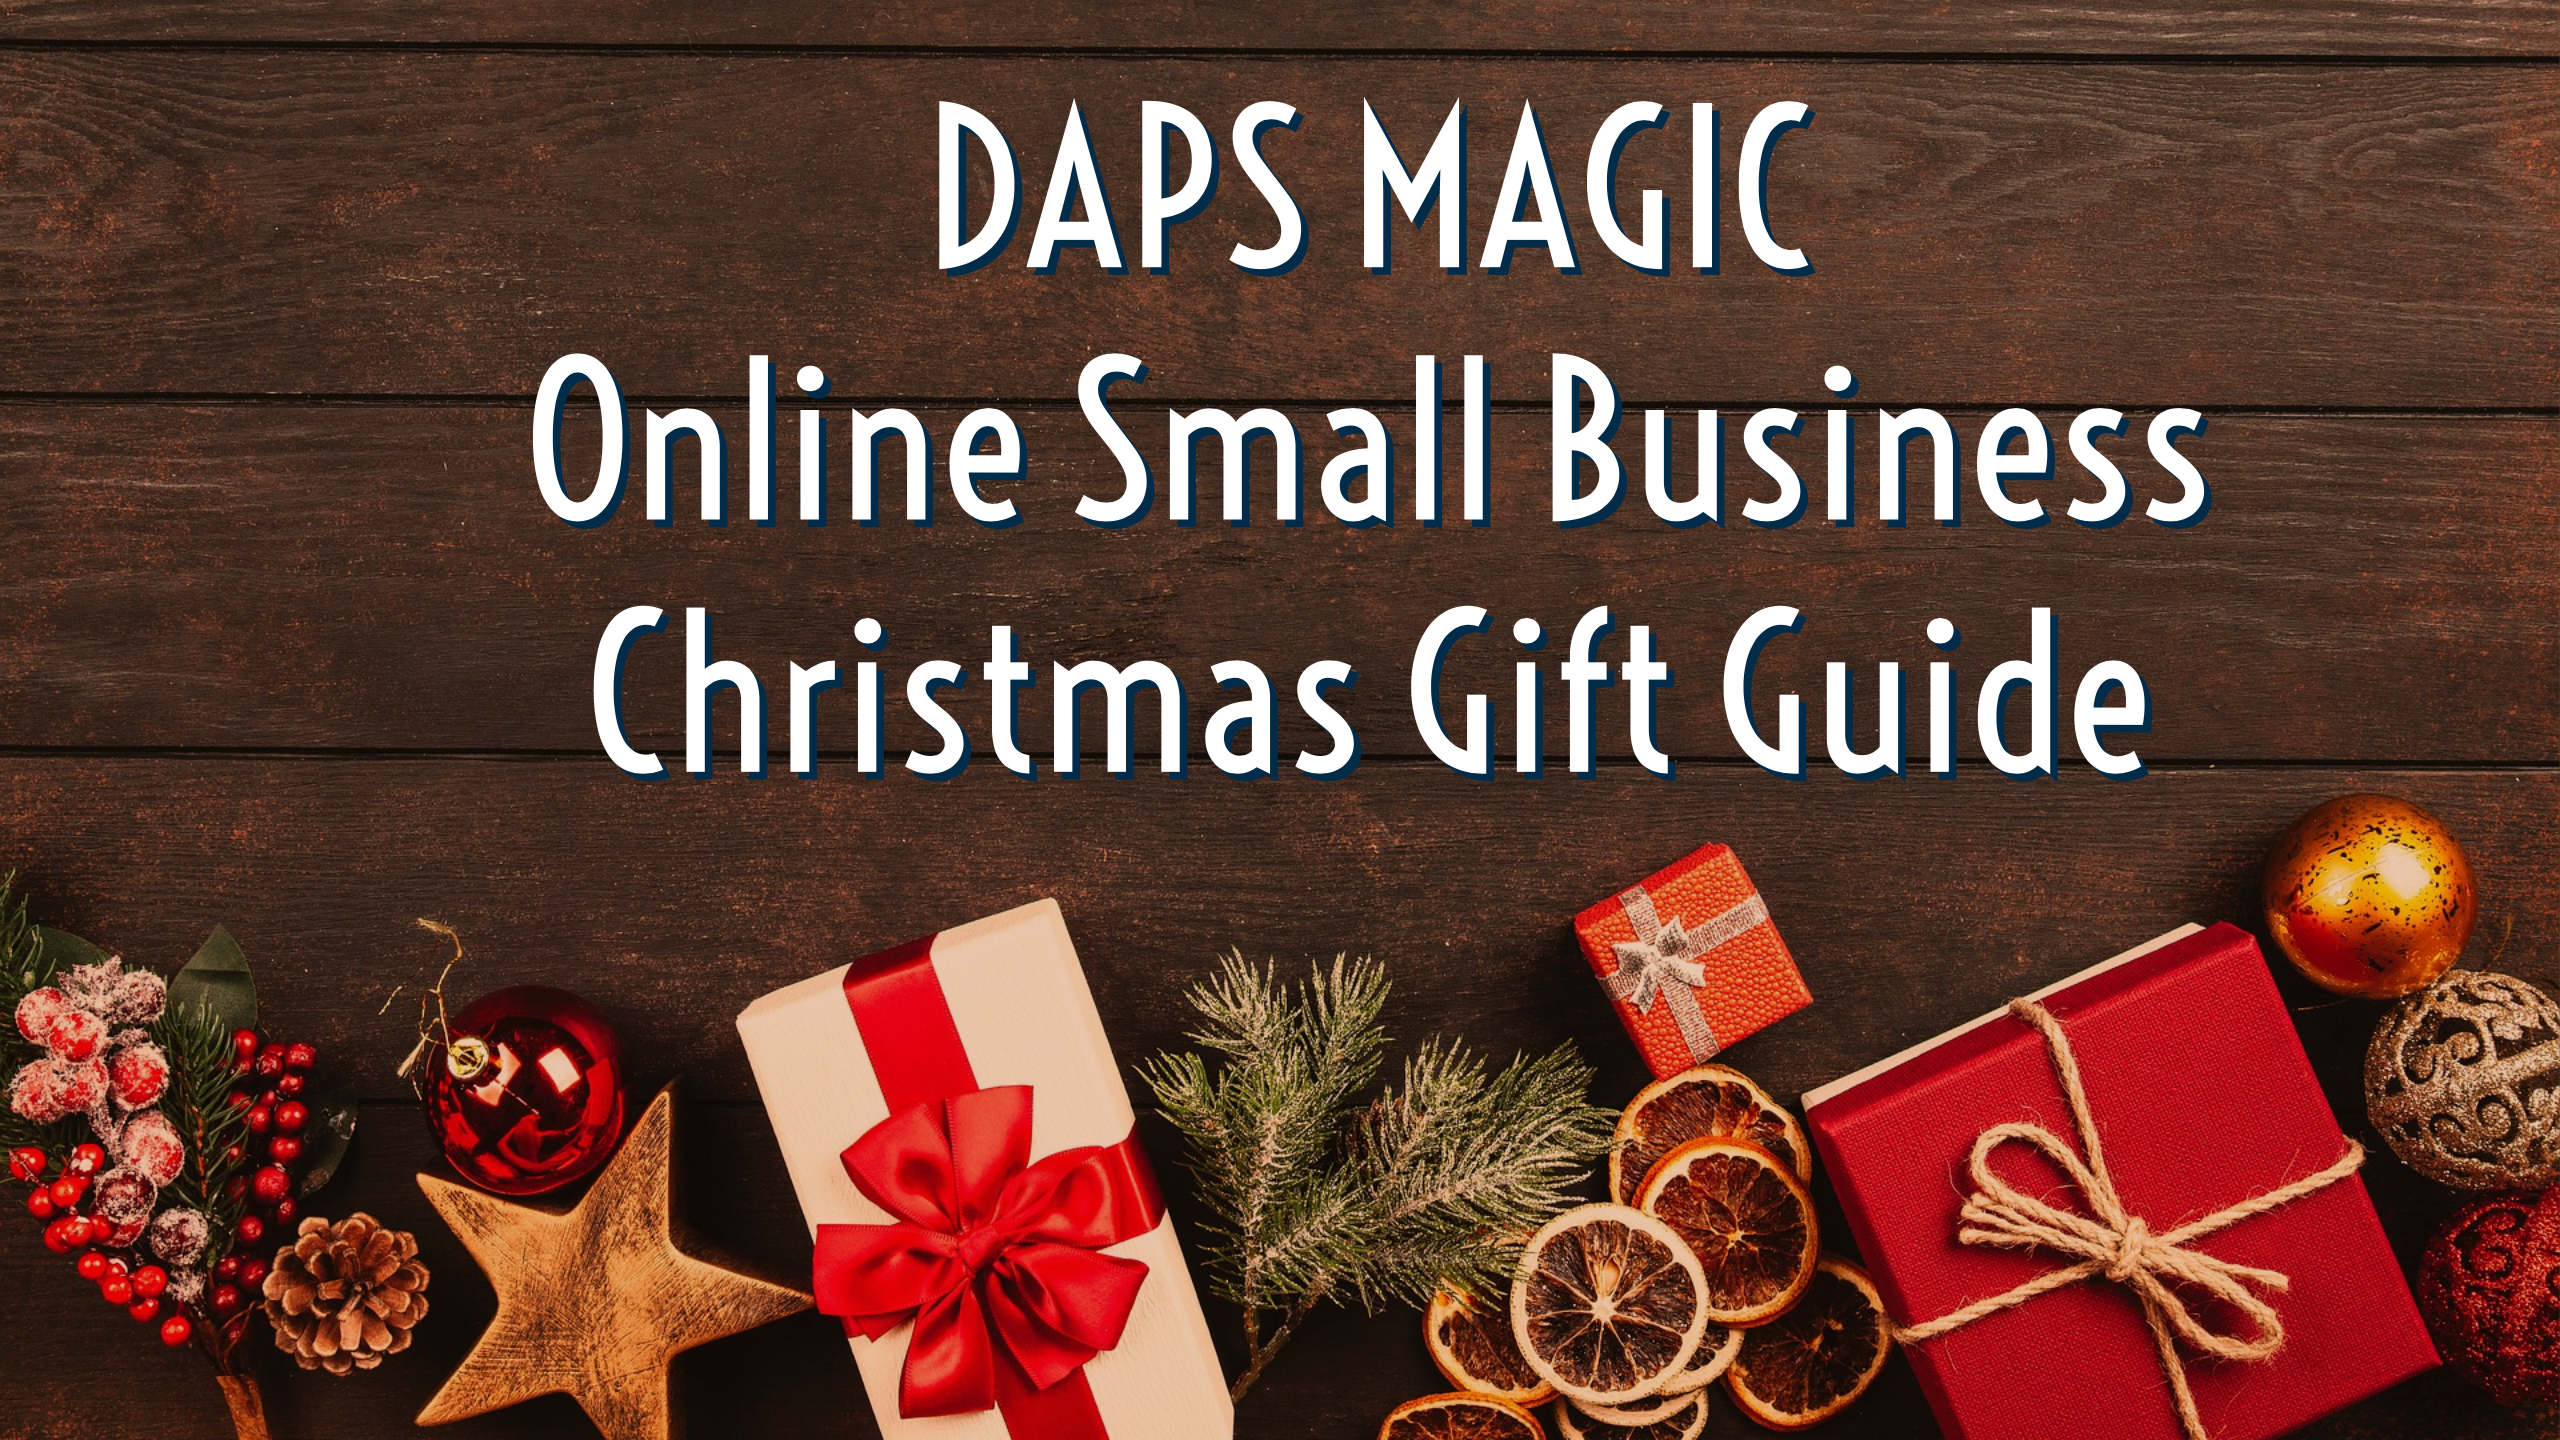 Gift Guide: Magical Online Small Business Utilized by the DAPS MAGIC Team!